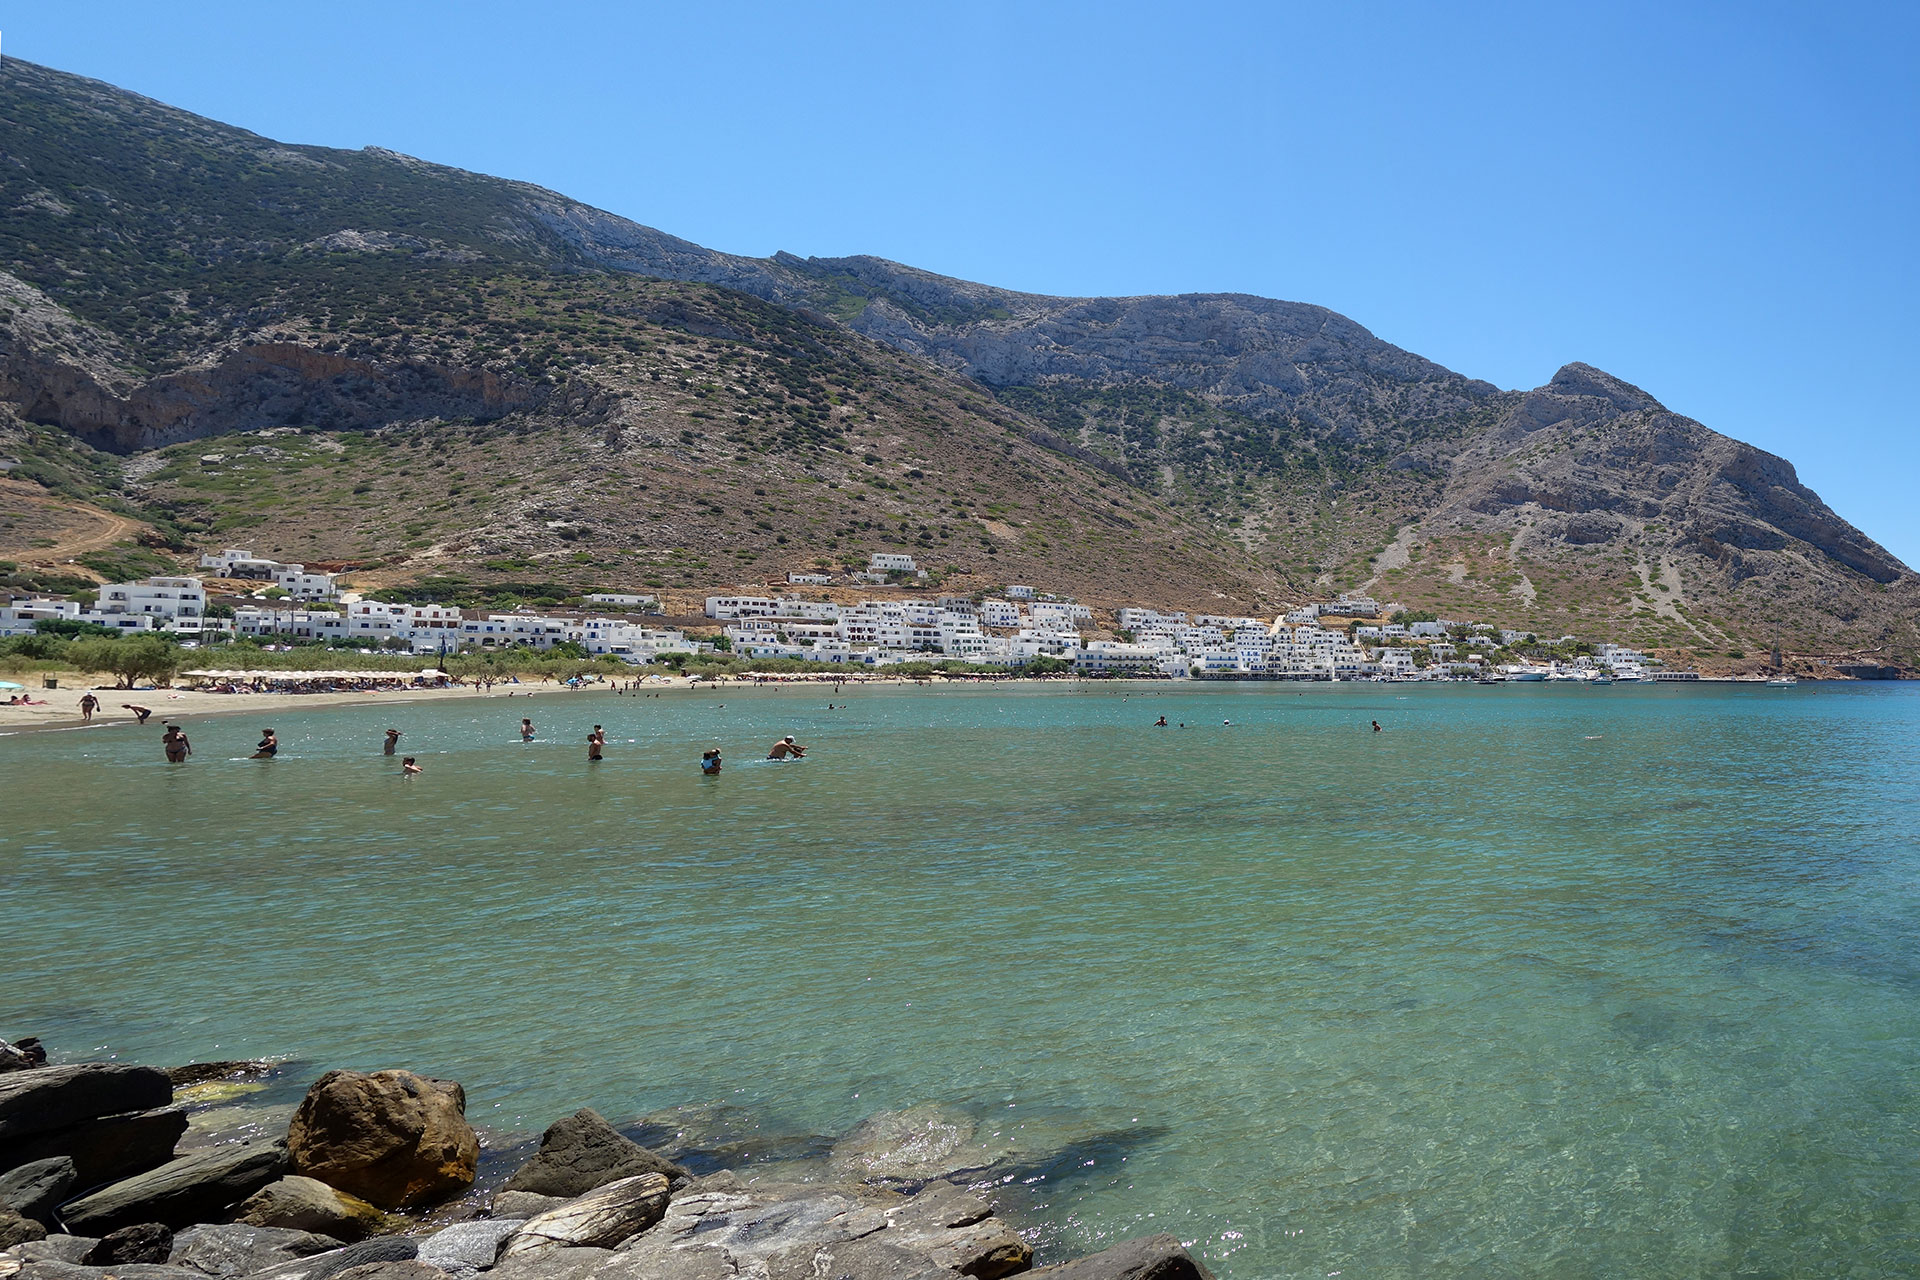 The beach of Kamares at Sifnos